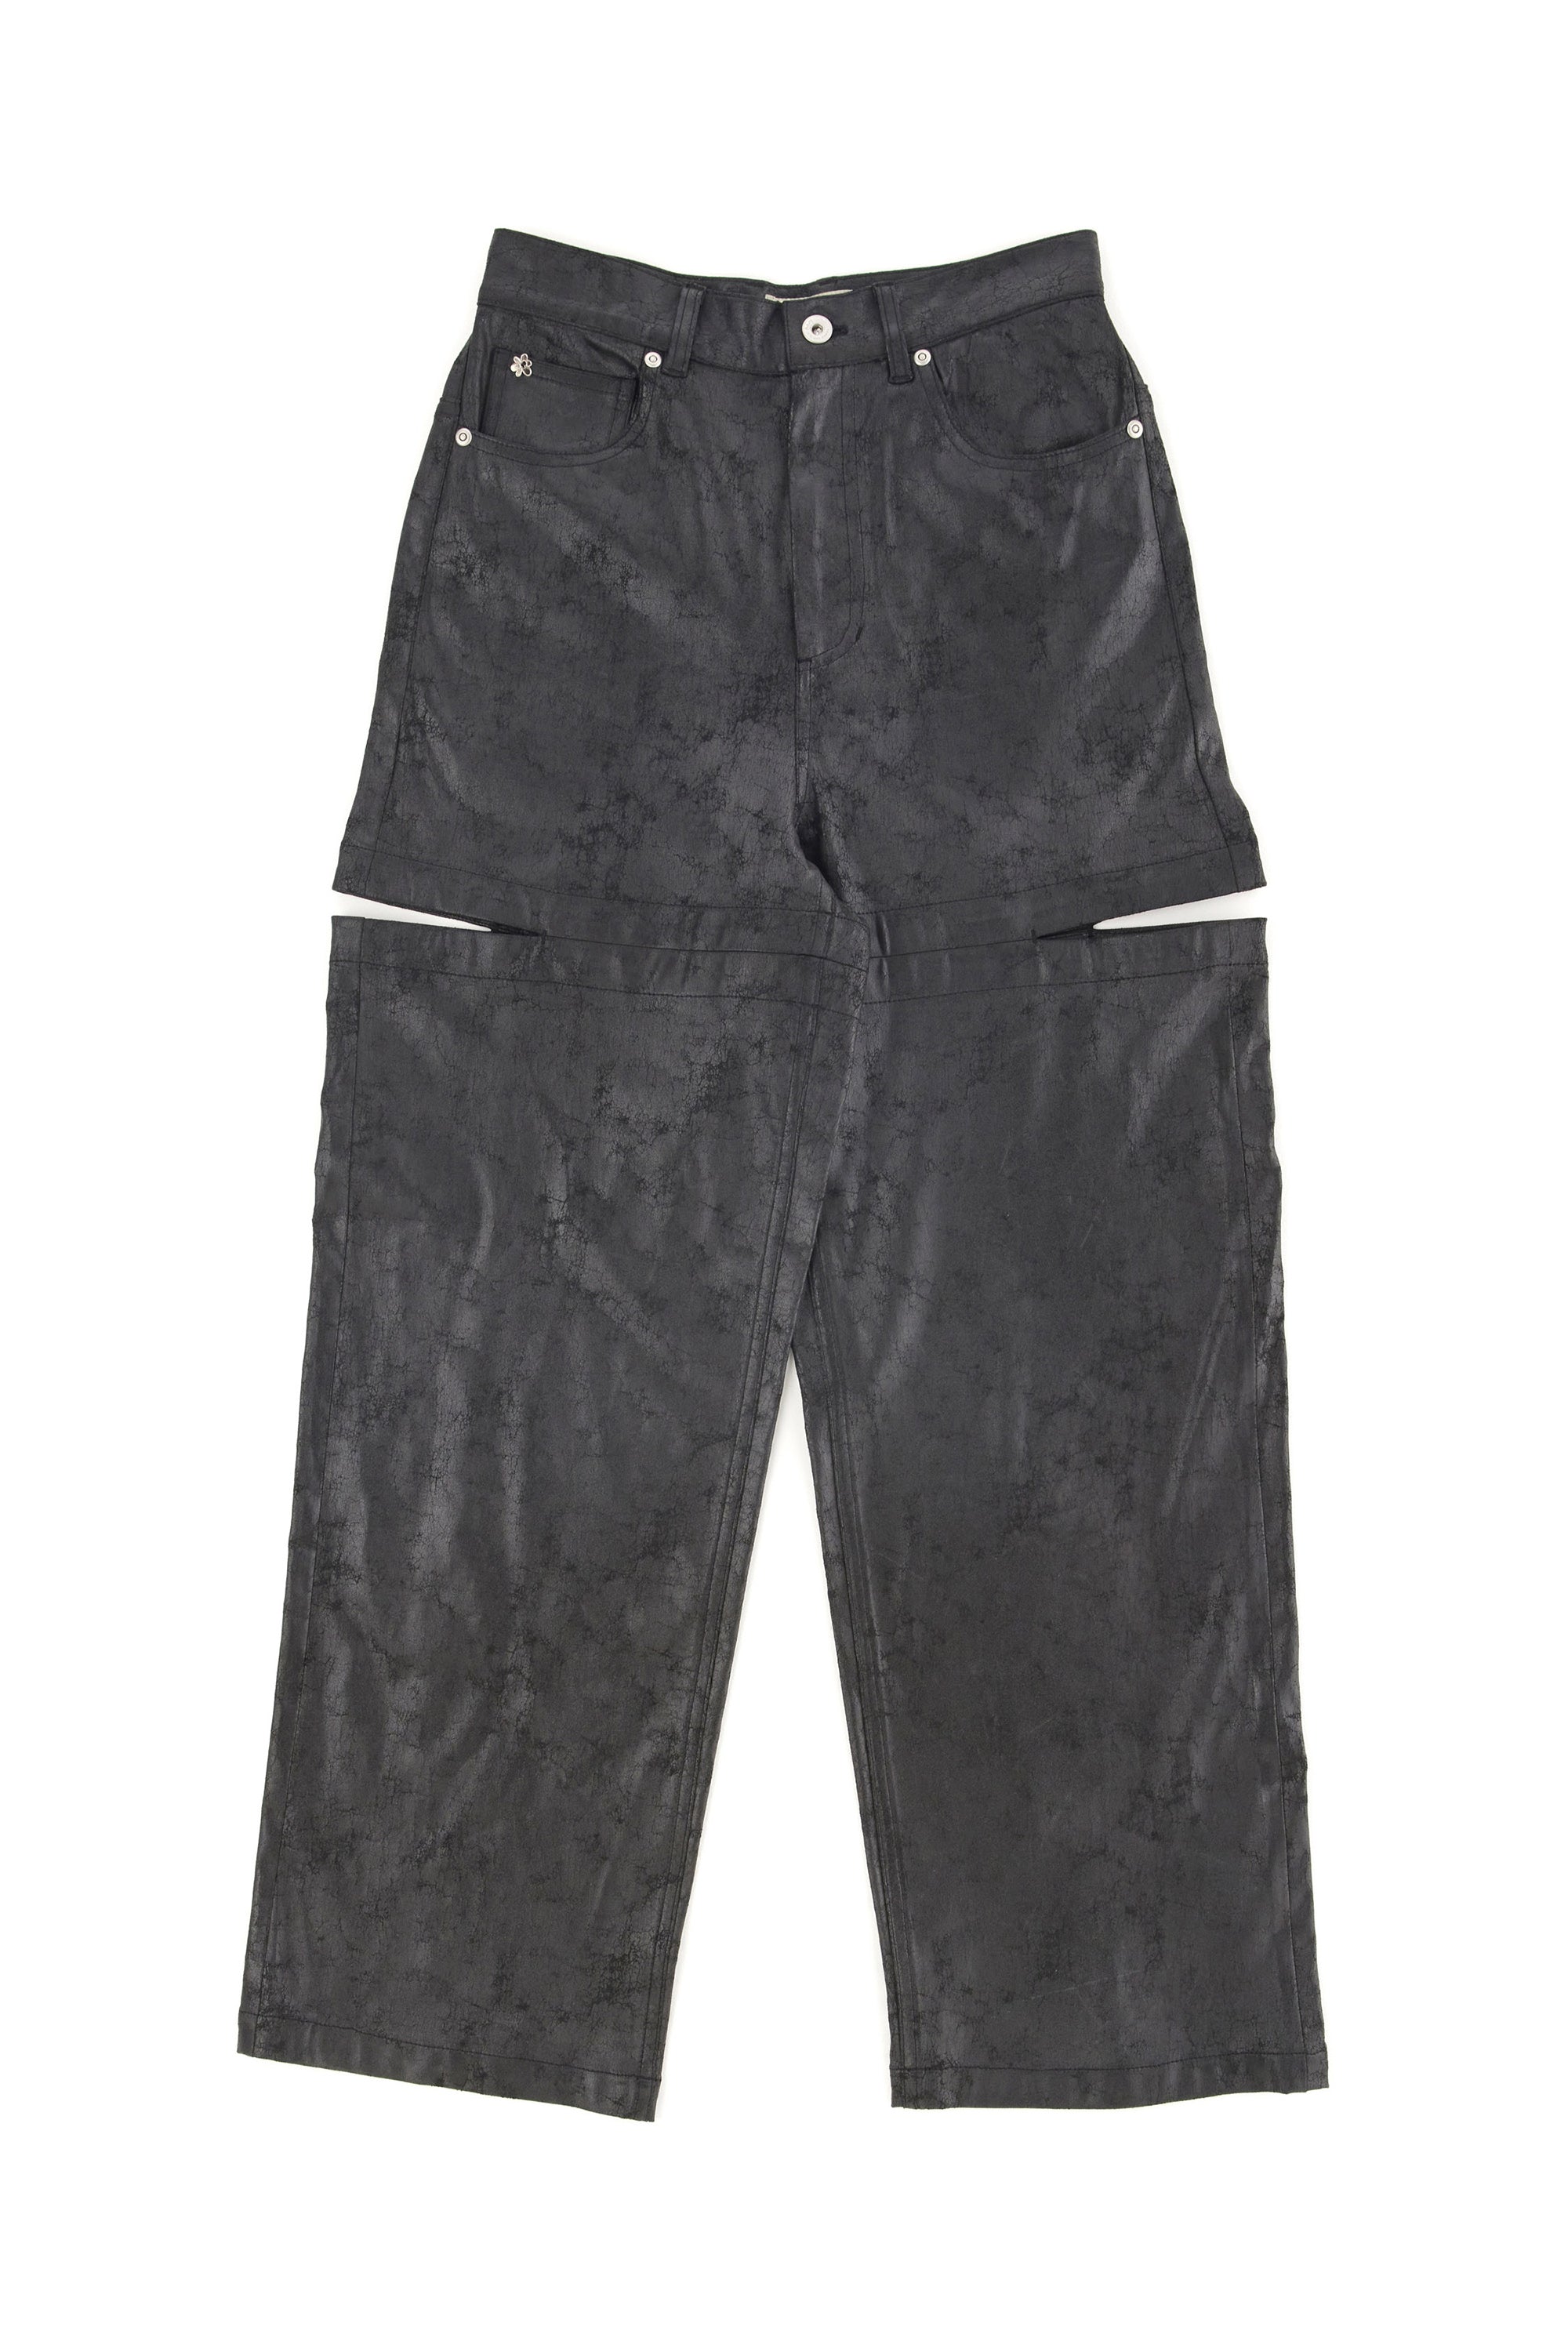 The CRACKED VINYL AWA PANT  available online with global shipping, and in PAM Stores Melbourne and Sydney.